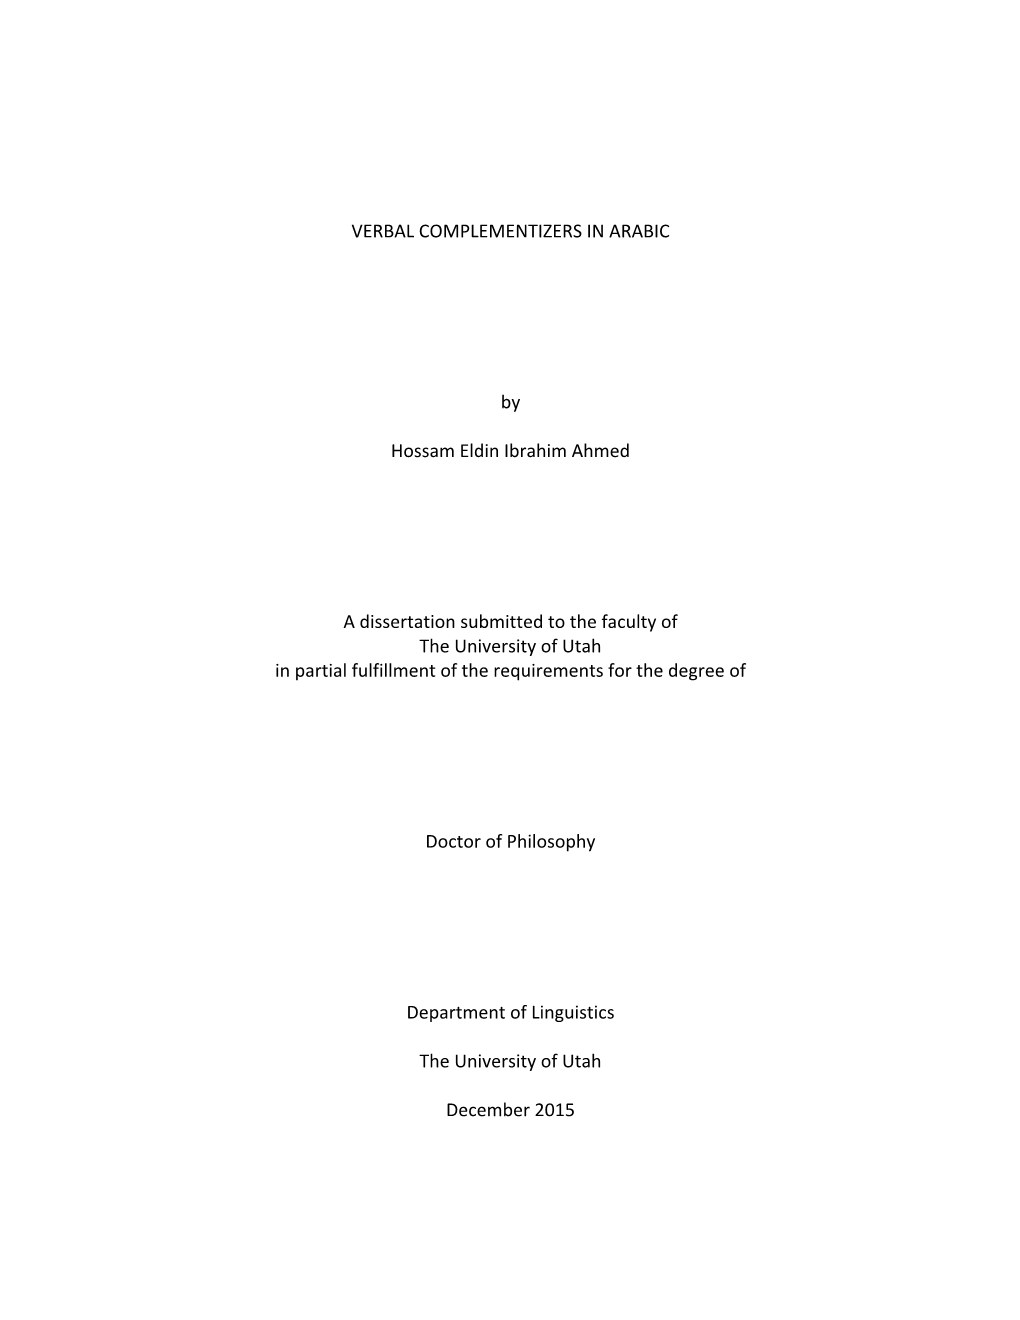 VERBAL COMPLEMENTIZERS in ARABIC by Hossam Eldin Ibrahim Ahmed a Dissertation Submitted to the Faculty Of